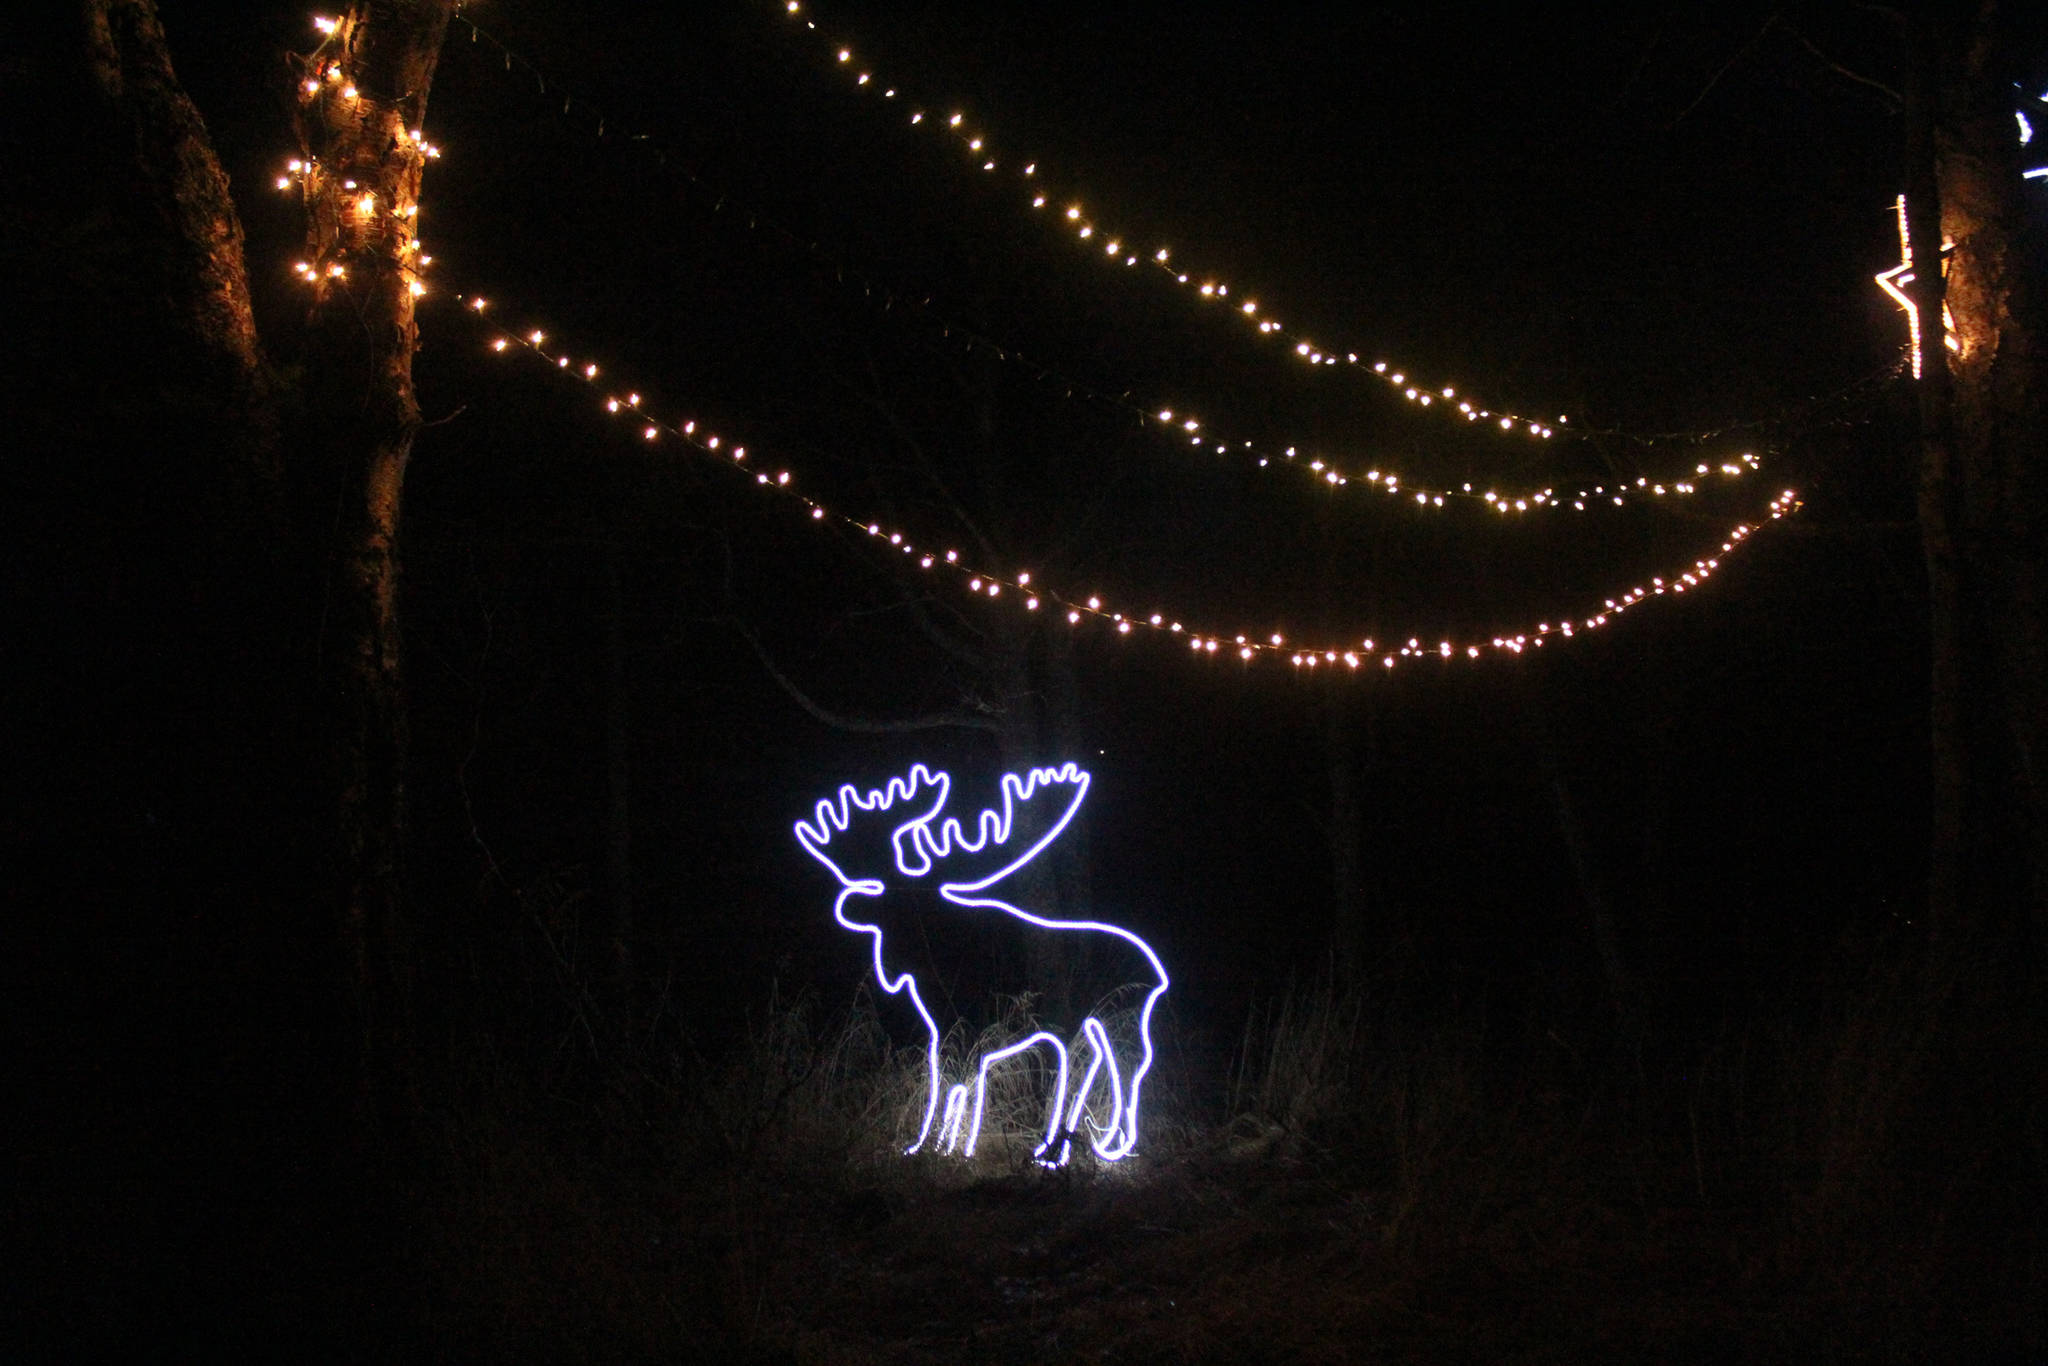 A lone moose light structure rests under strings of twinkle lights, waiting to amuse passersby, on Saturday, Dec. 16, 2017 at the Bear Creek Winery Garden of Lights near Homer, Alaska. (Photo by Megan Pacer/Homer News)